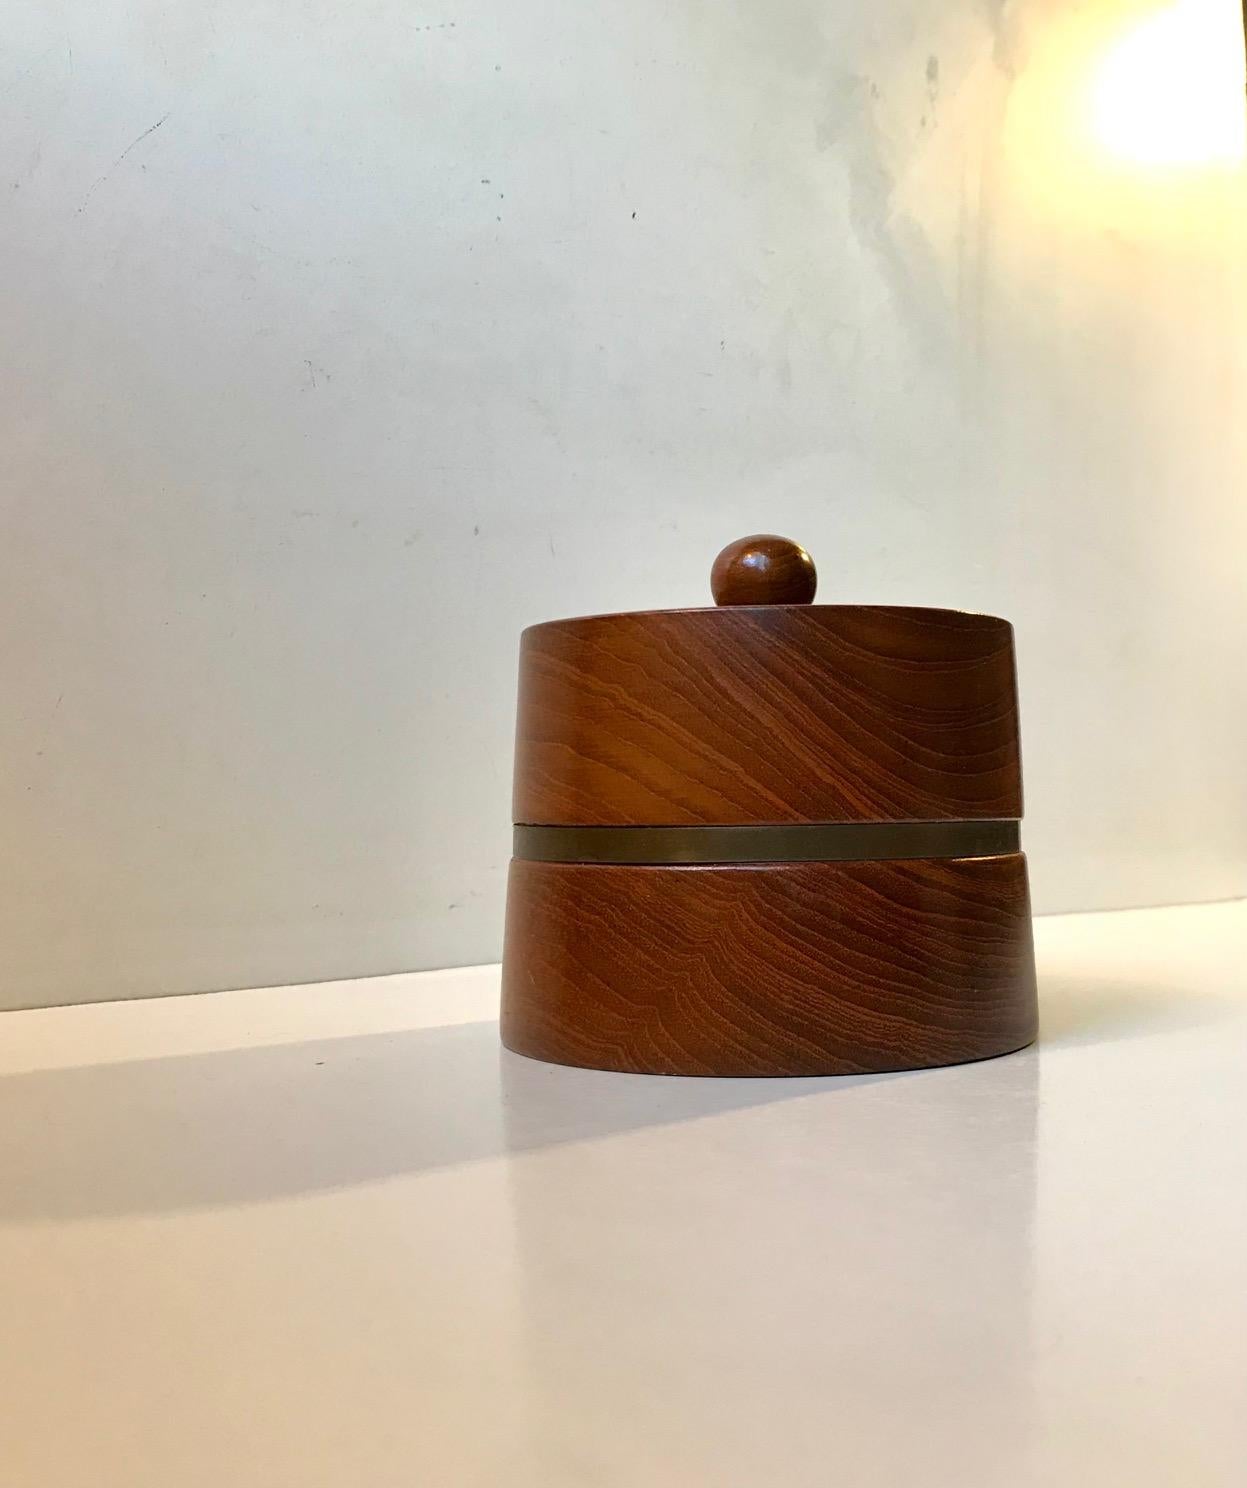 A wellmade jar for tobacco or tea. Its made from solid stacked teak and features a decorative 'belt' in patinated brass. It was designed and made by Christer design during the 1960s in a style reminiscent of Kay Bojesen and Henning Koppel.